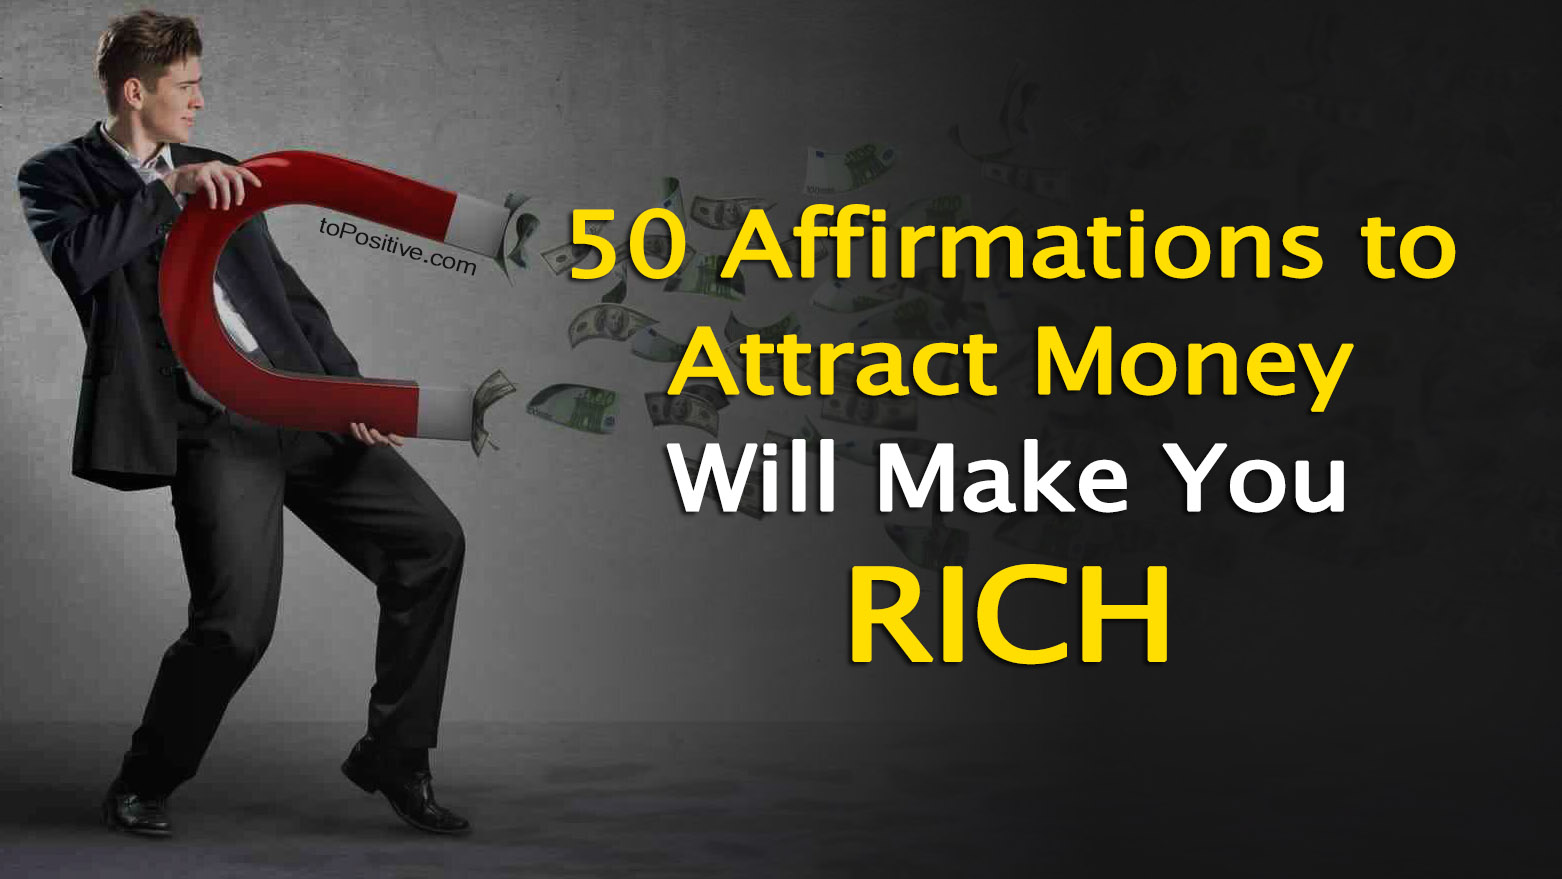 Affirmations to attract money are positive statements that you repeat to yourself on a regular basis to help you shift your mindset and focus on attracting financial abundance into your life.